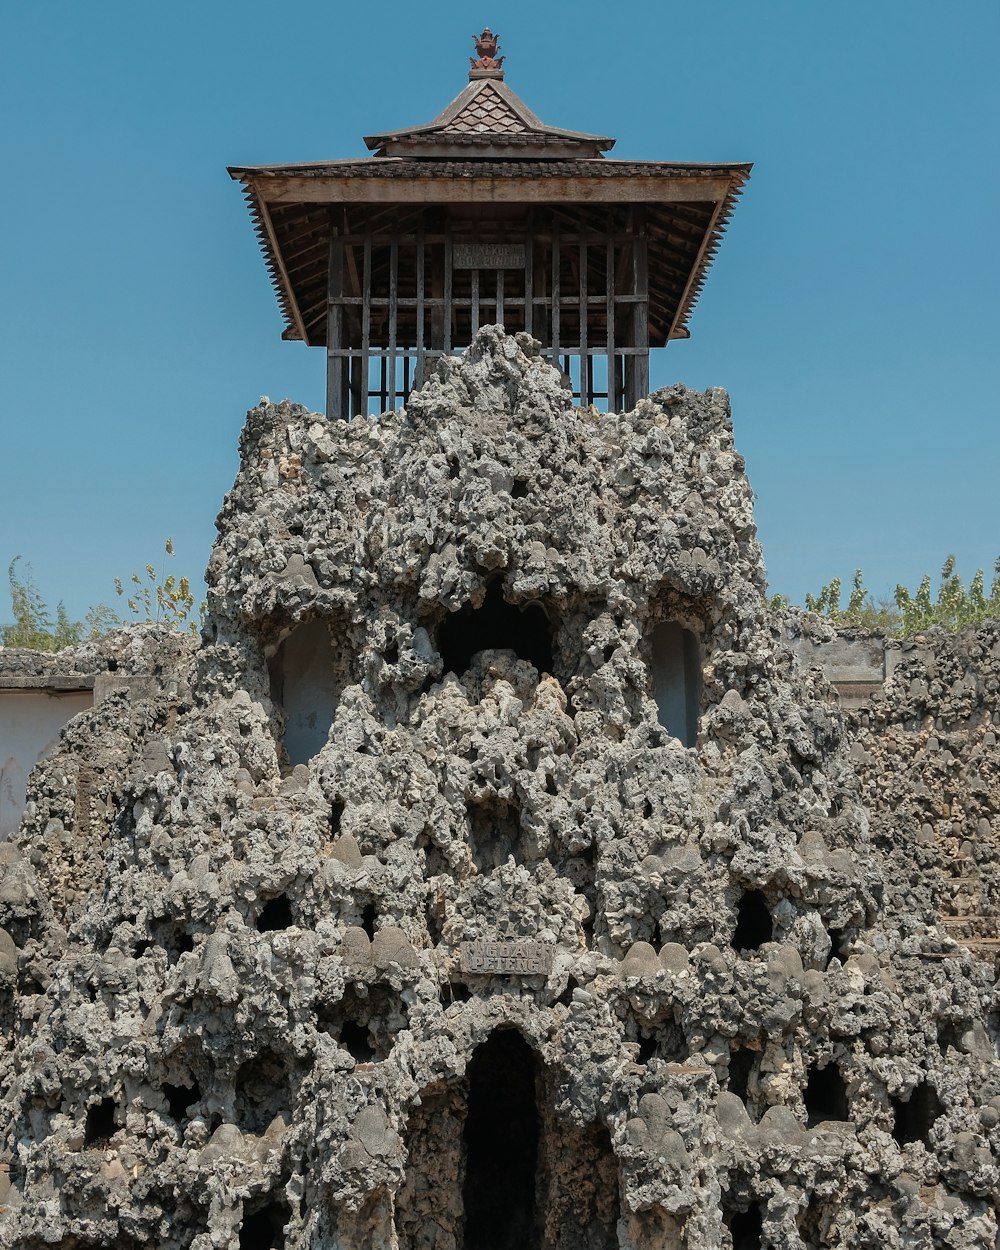 a building made of rocks with a tower in the background